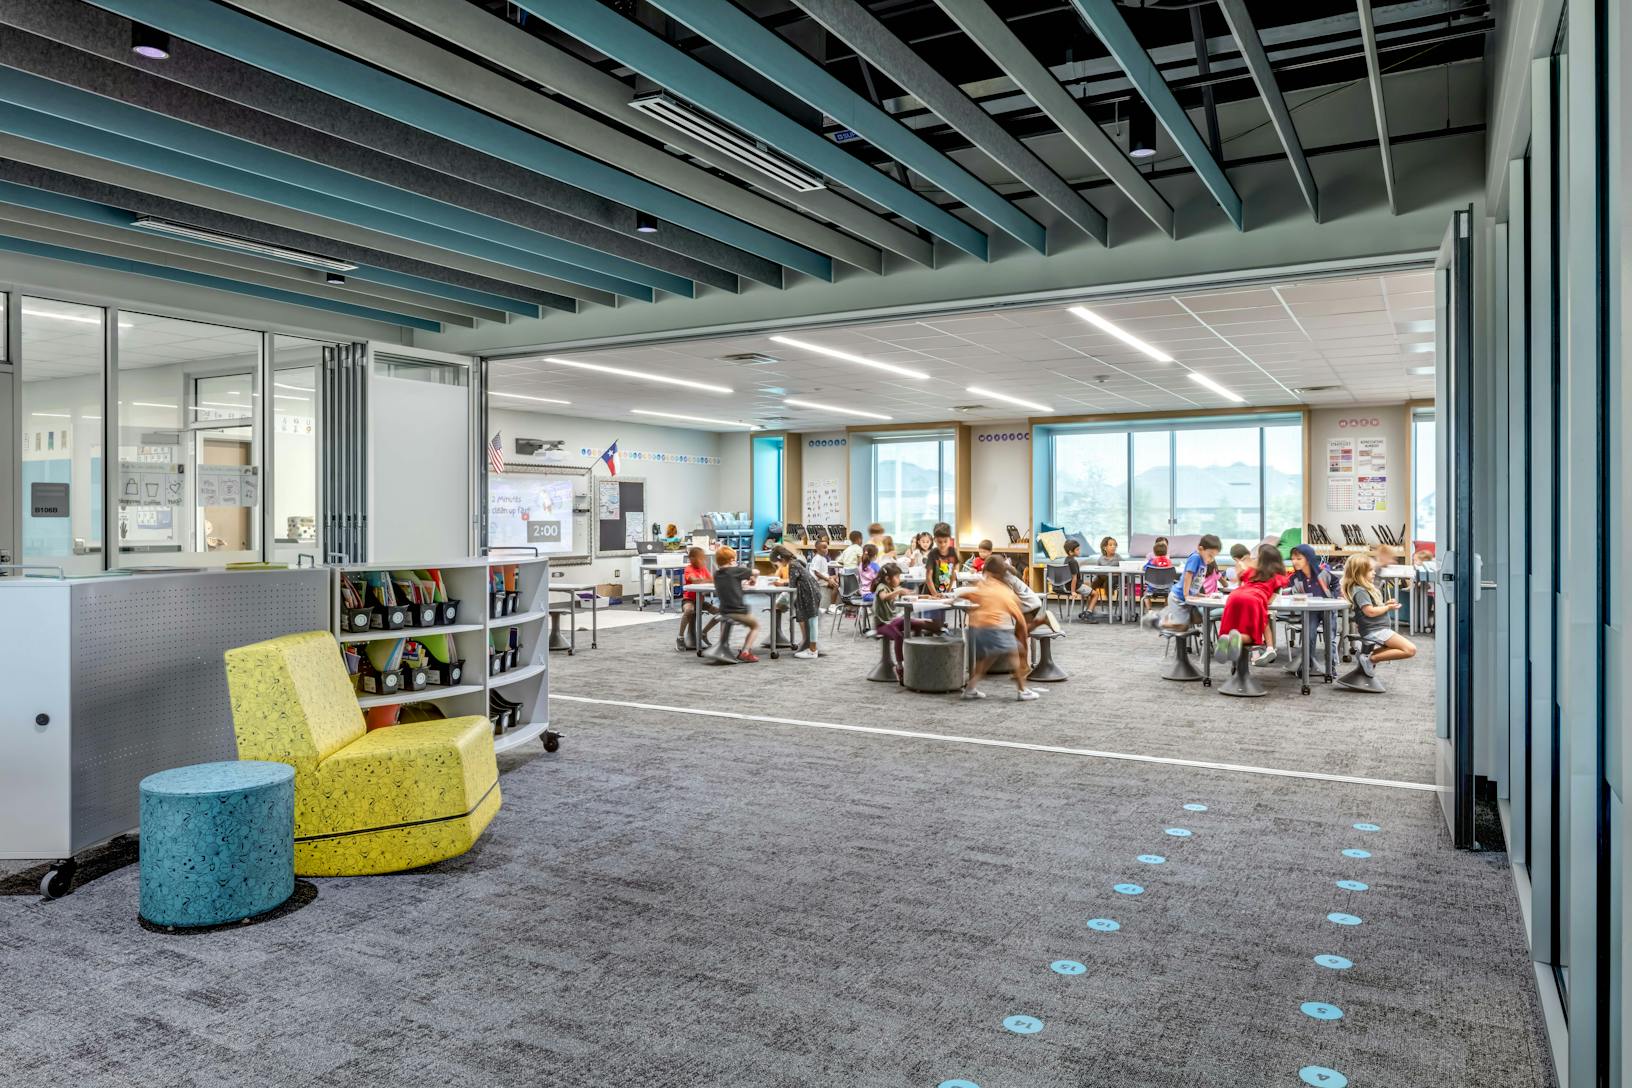 Interior acoustical movable glass walls at Minett Elementary school 